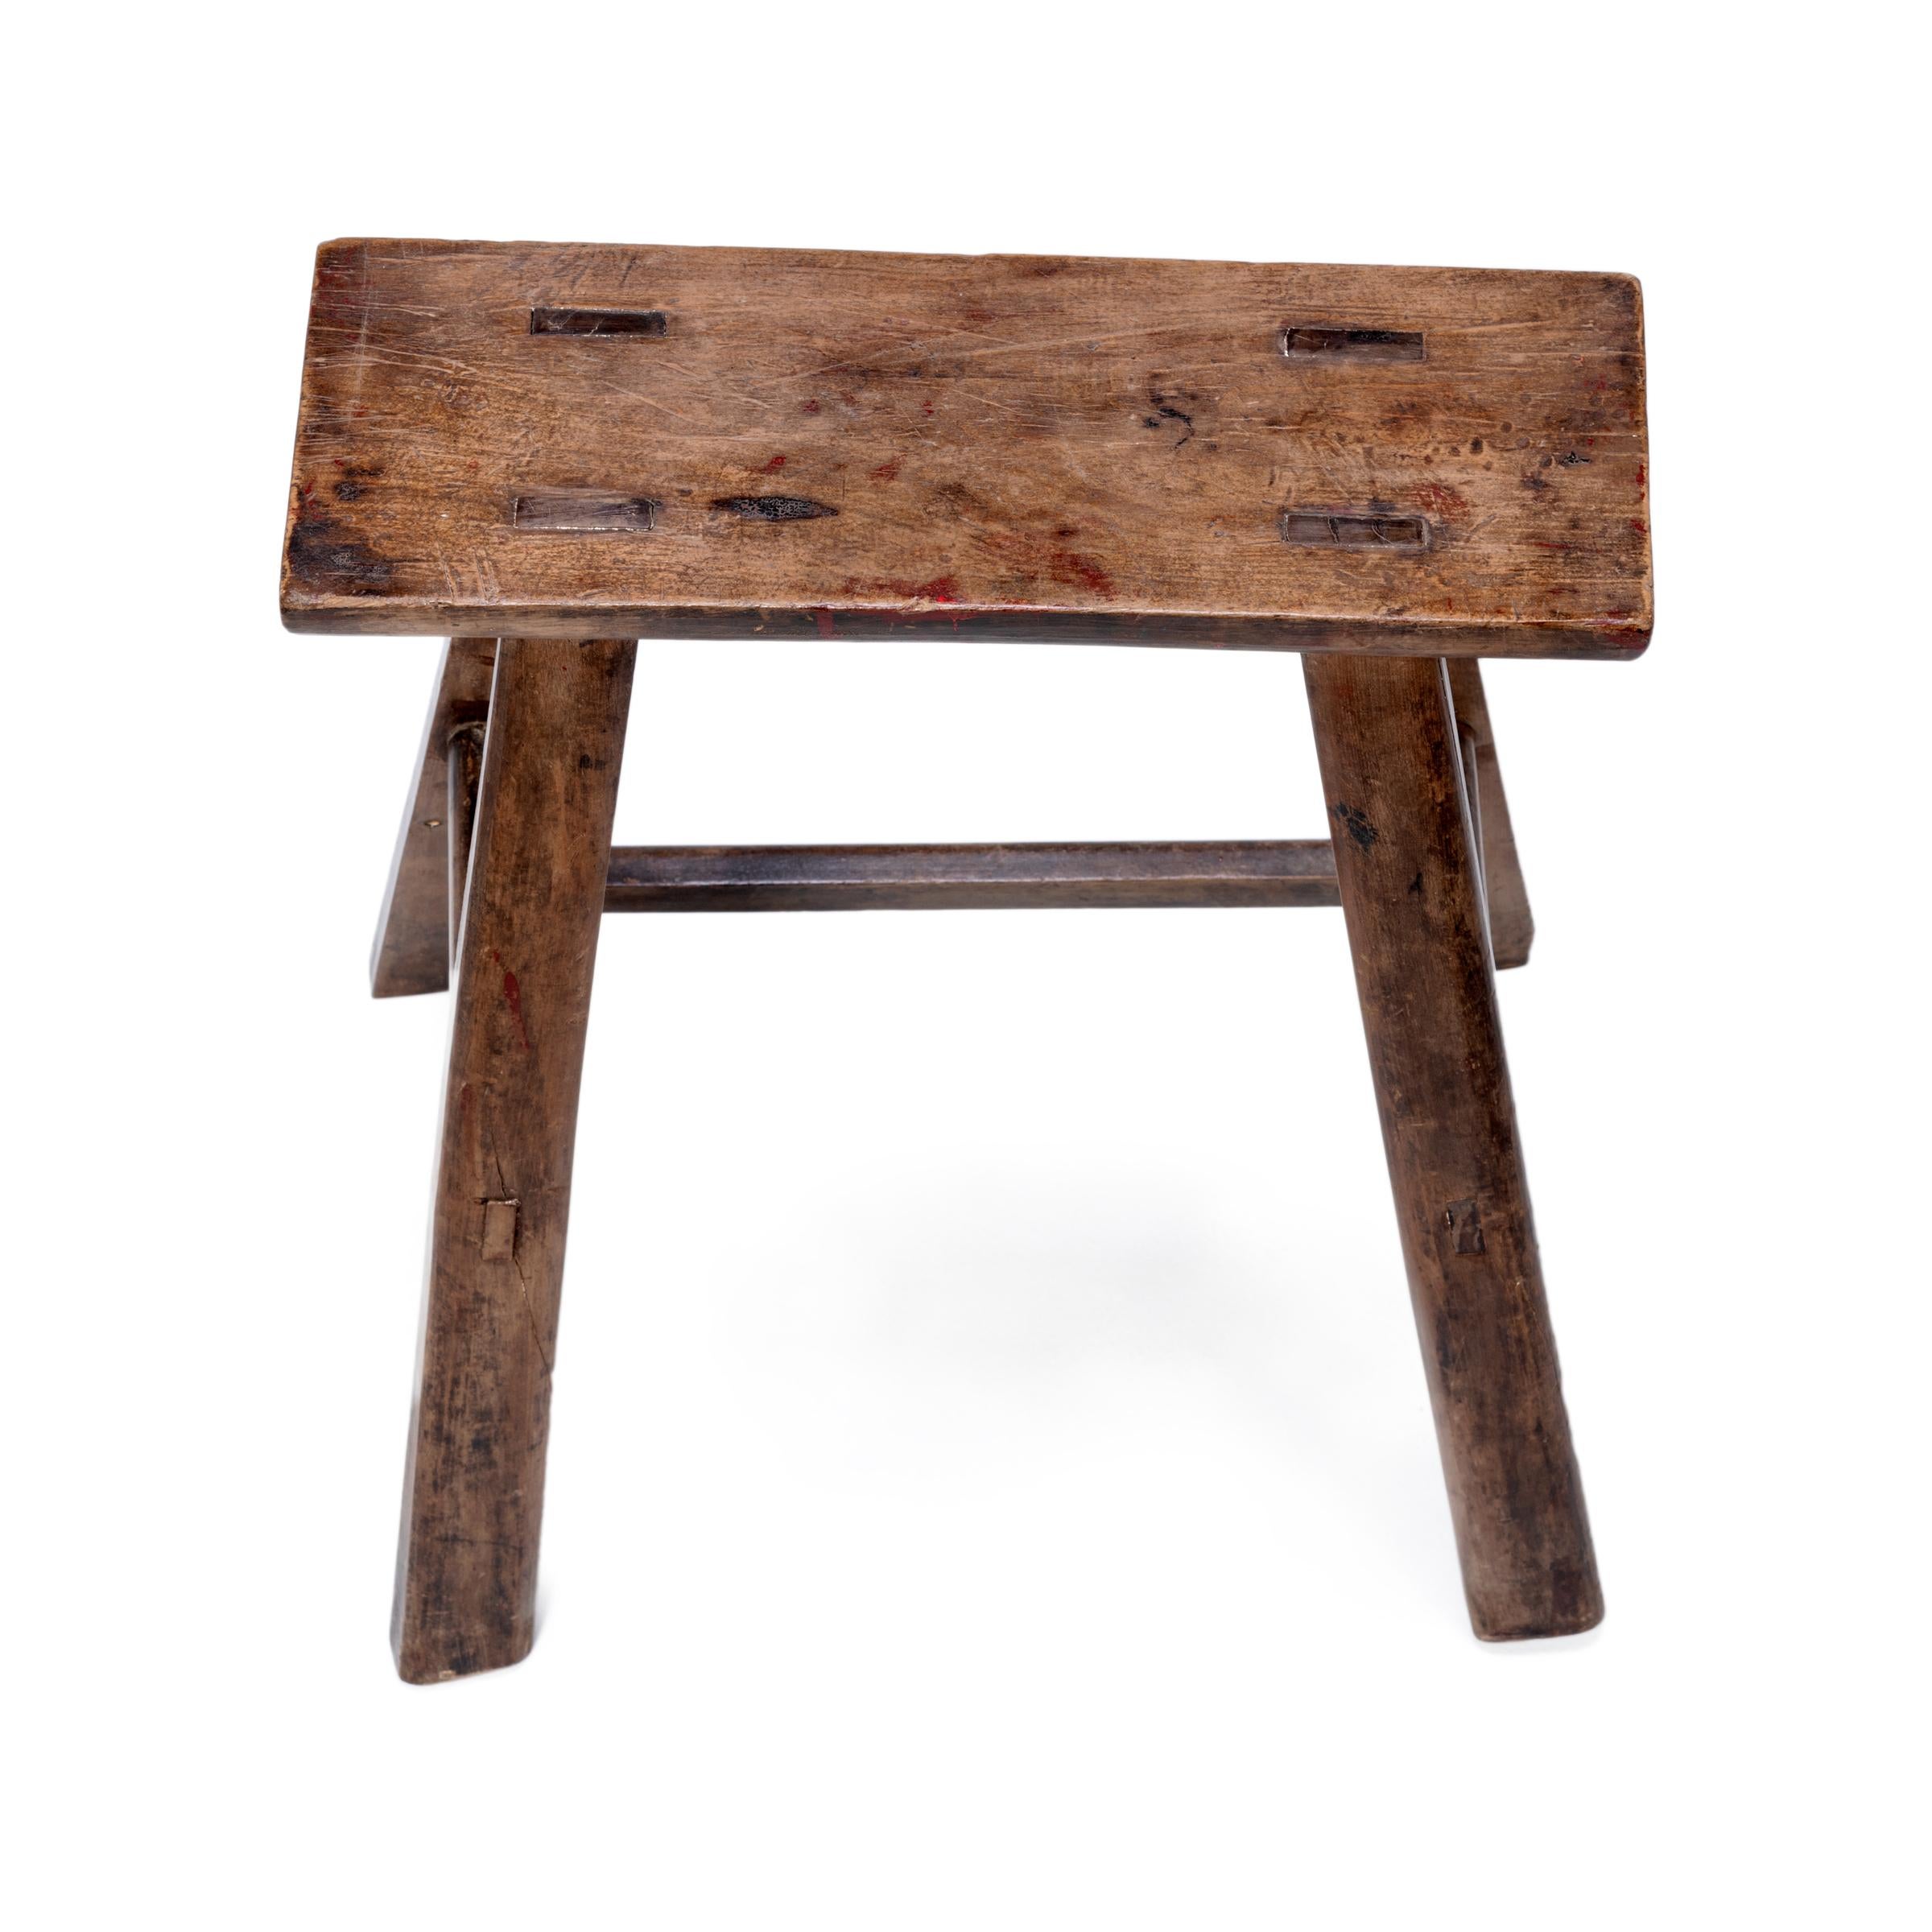 Elm 19th Century Provincial Chinese Courtyard Stool